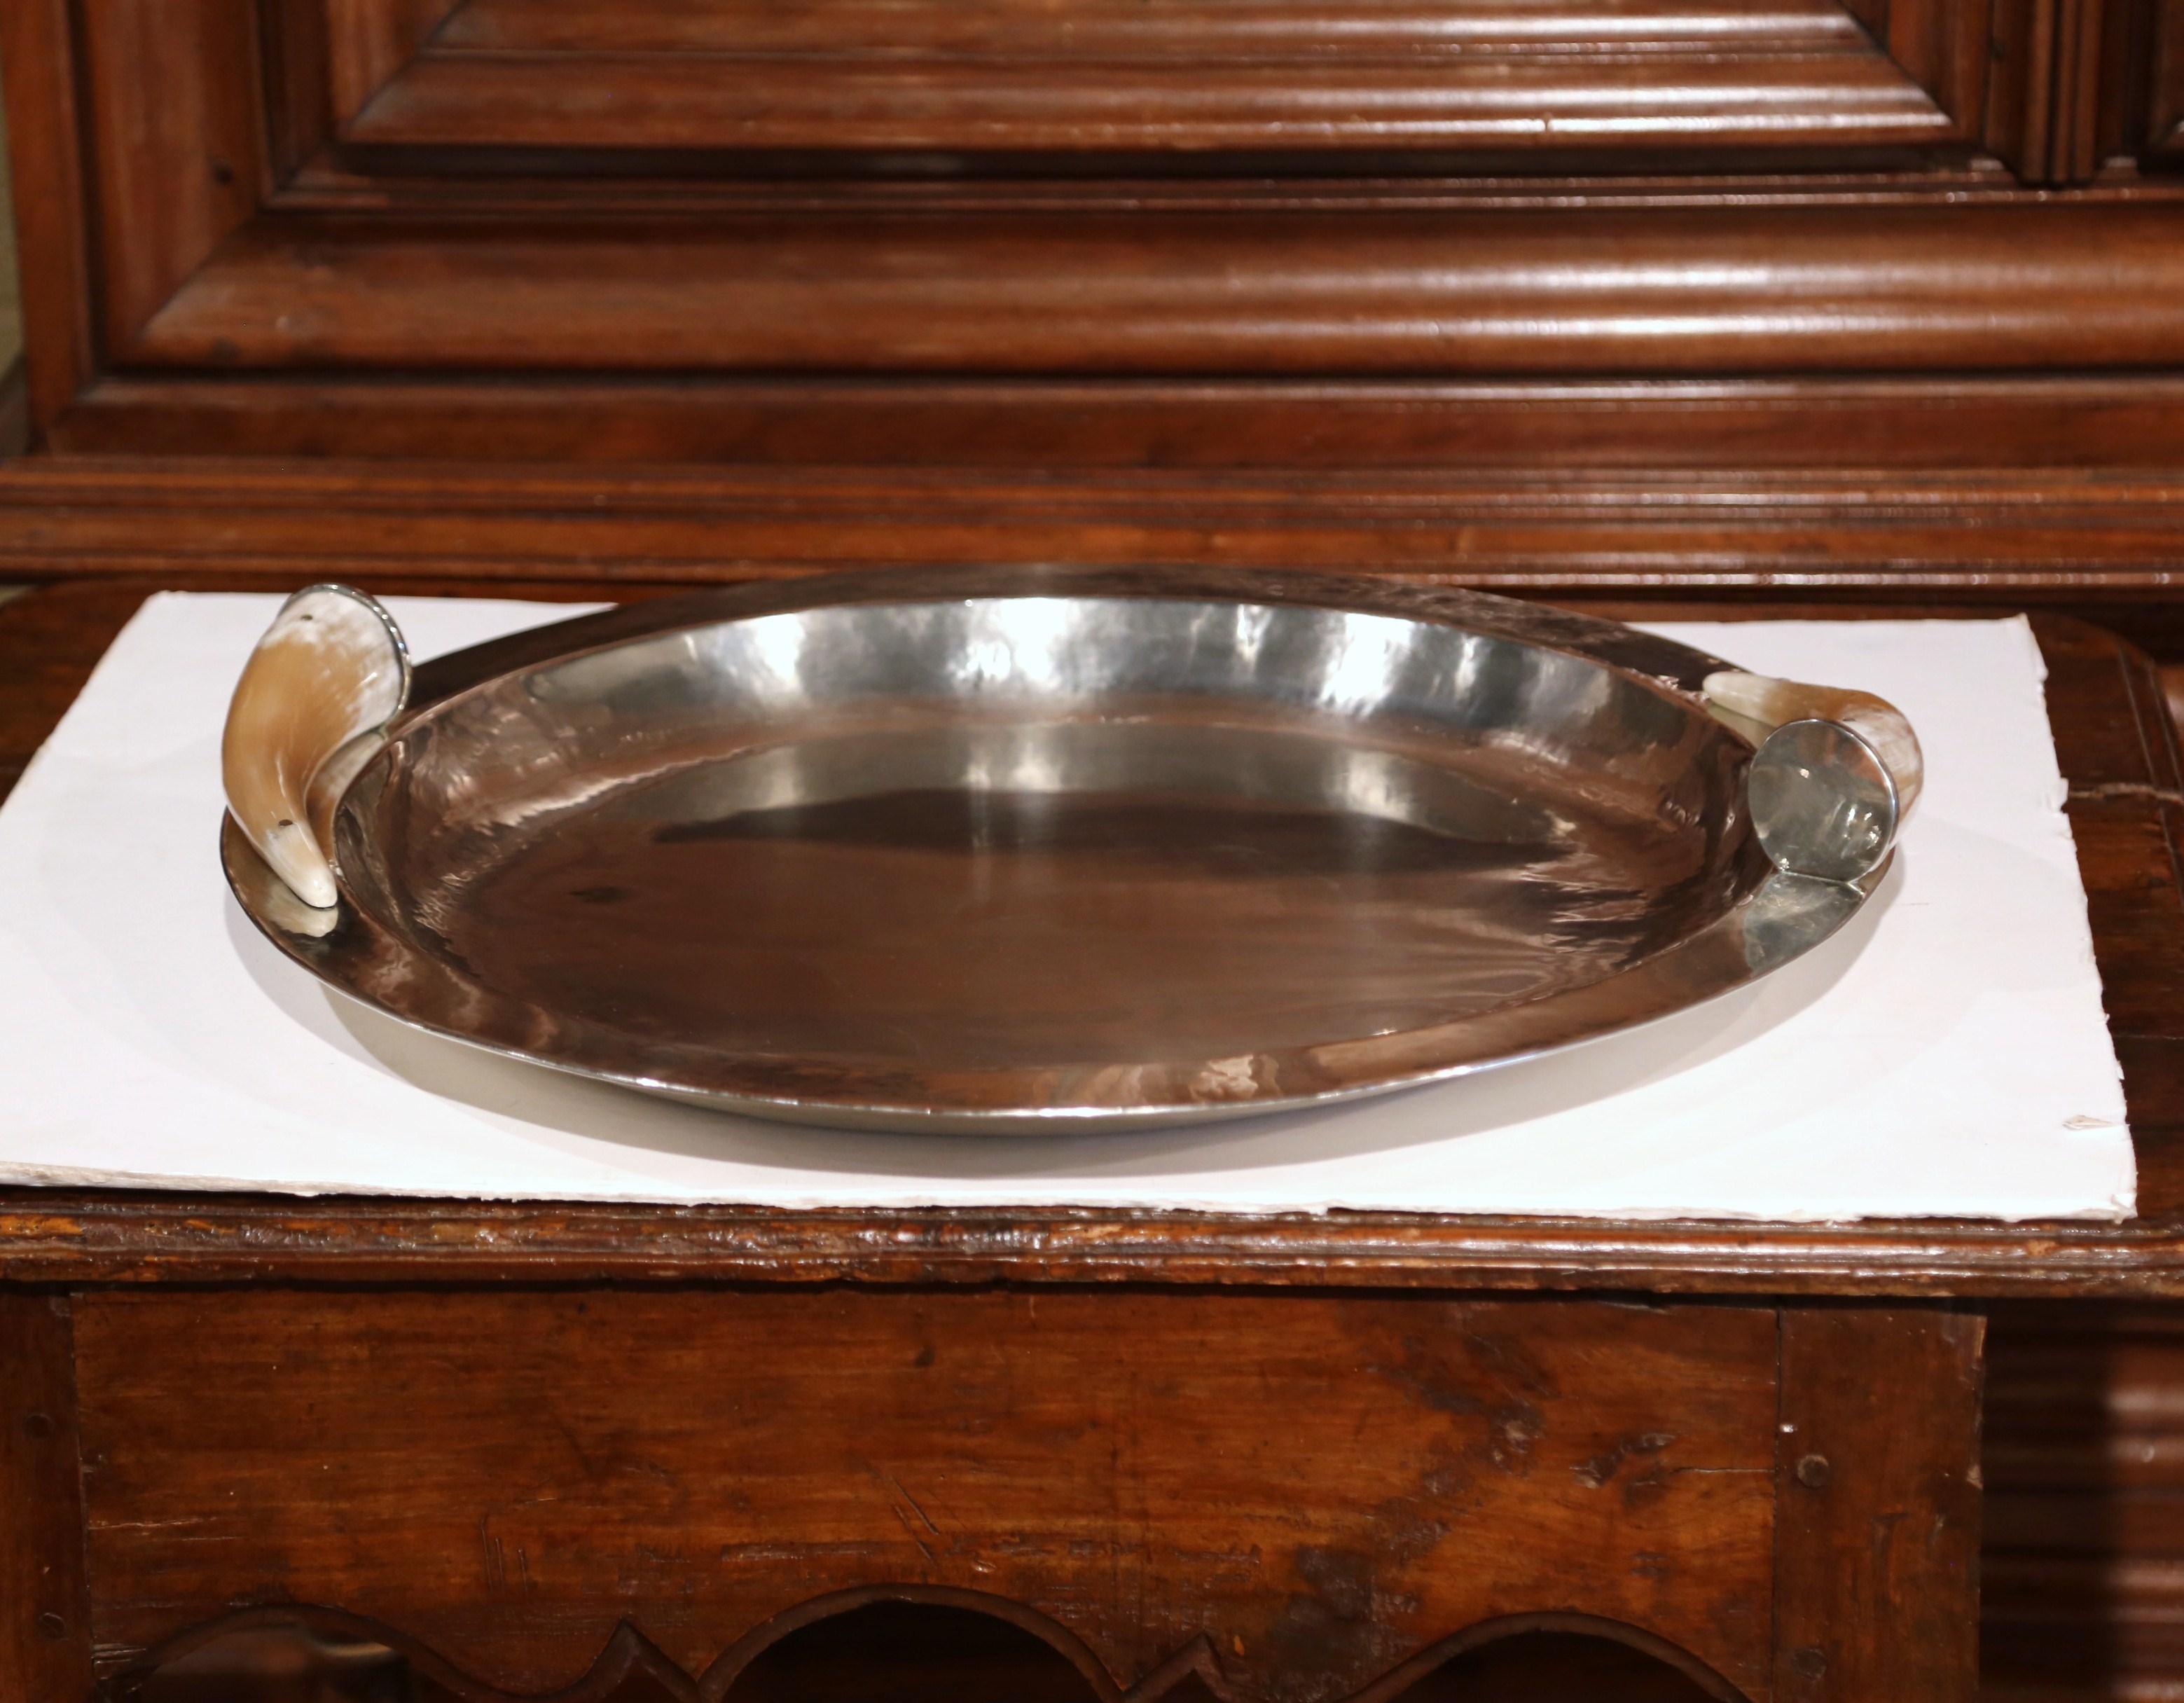 Argentine 20th Century Silver Plated Display Bowl with Bovine Horn Handles